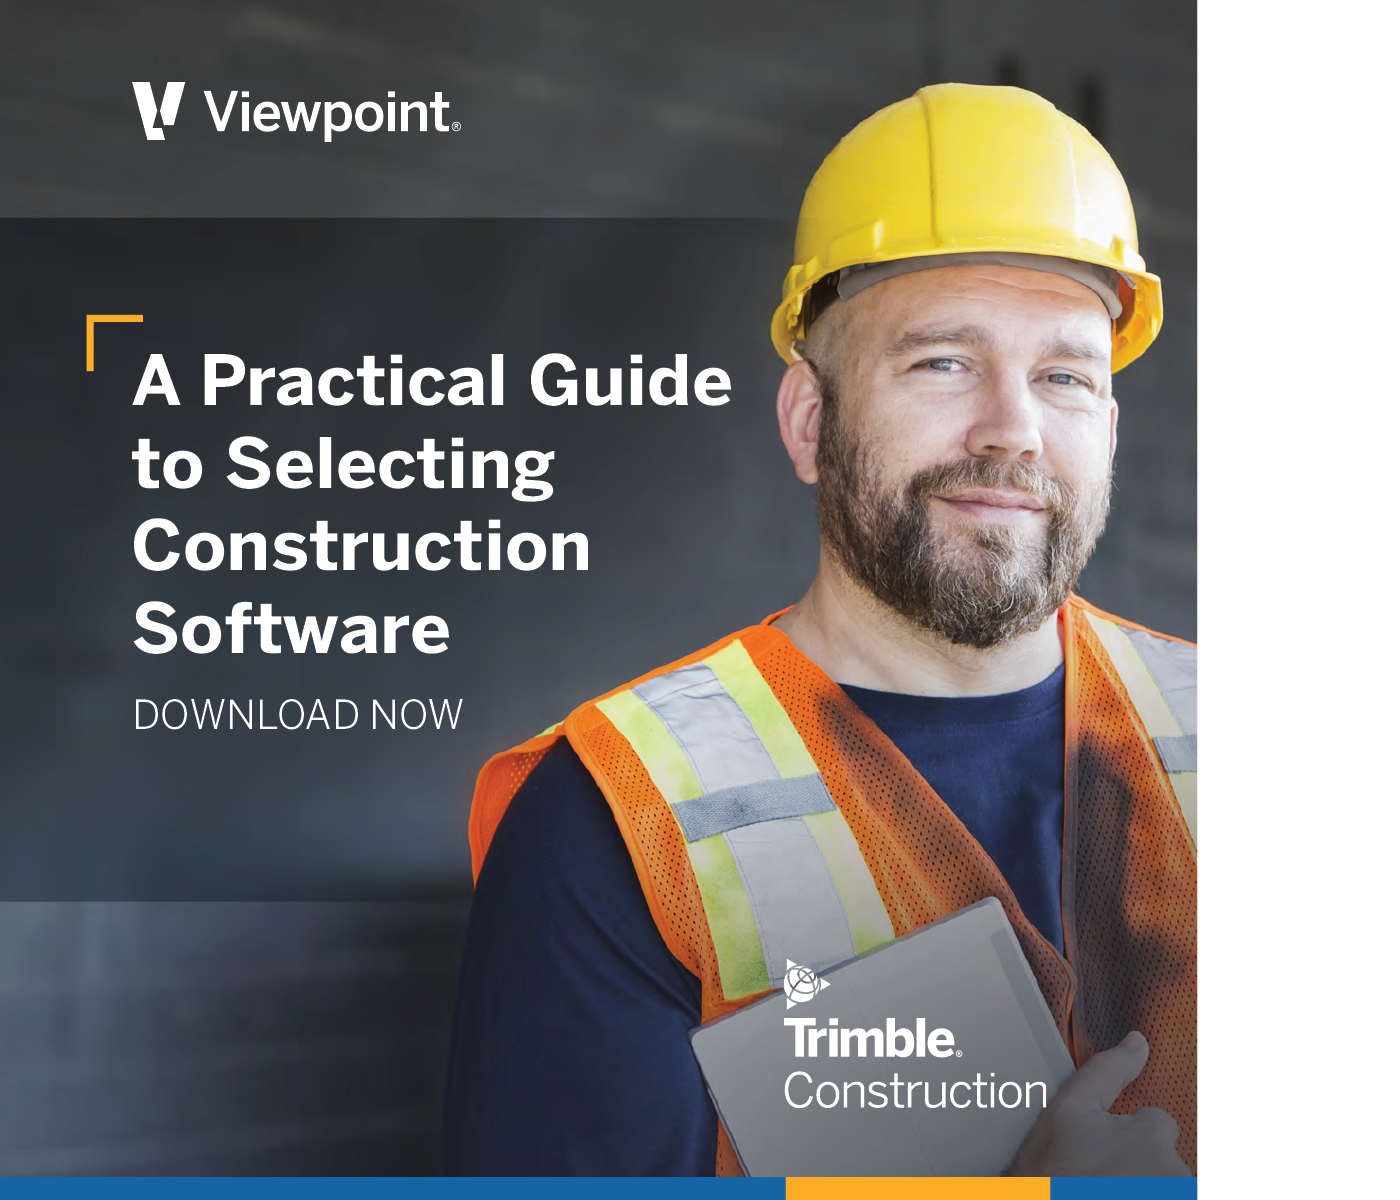 DOWNLOAD OUR FREE GUIDE - Not Sure Where To Start On Your Construction Software Quest? Help Is Here!